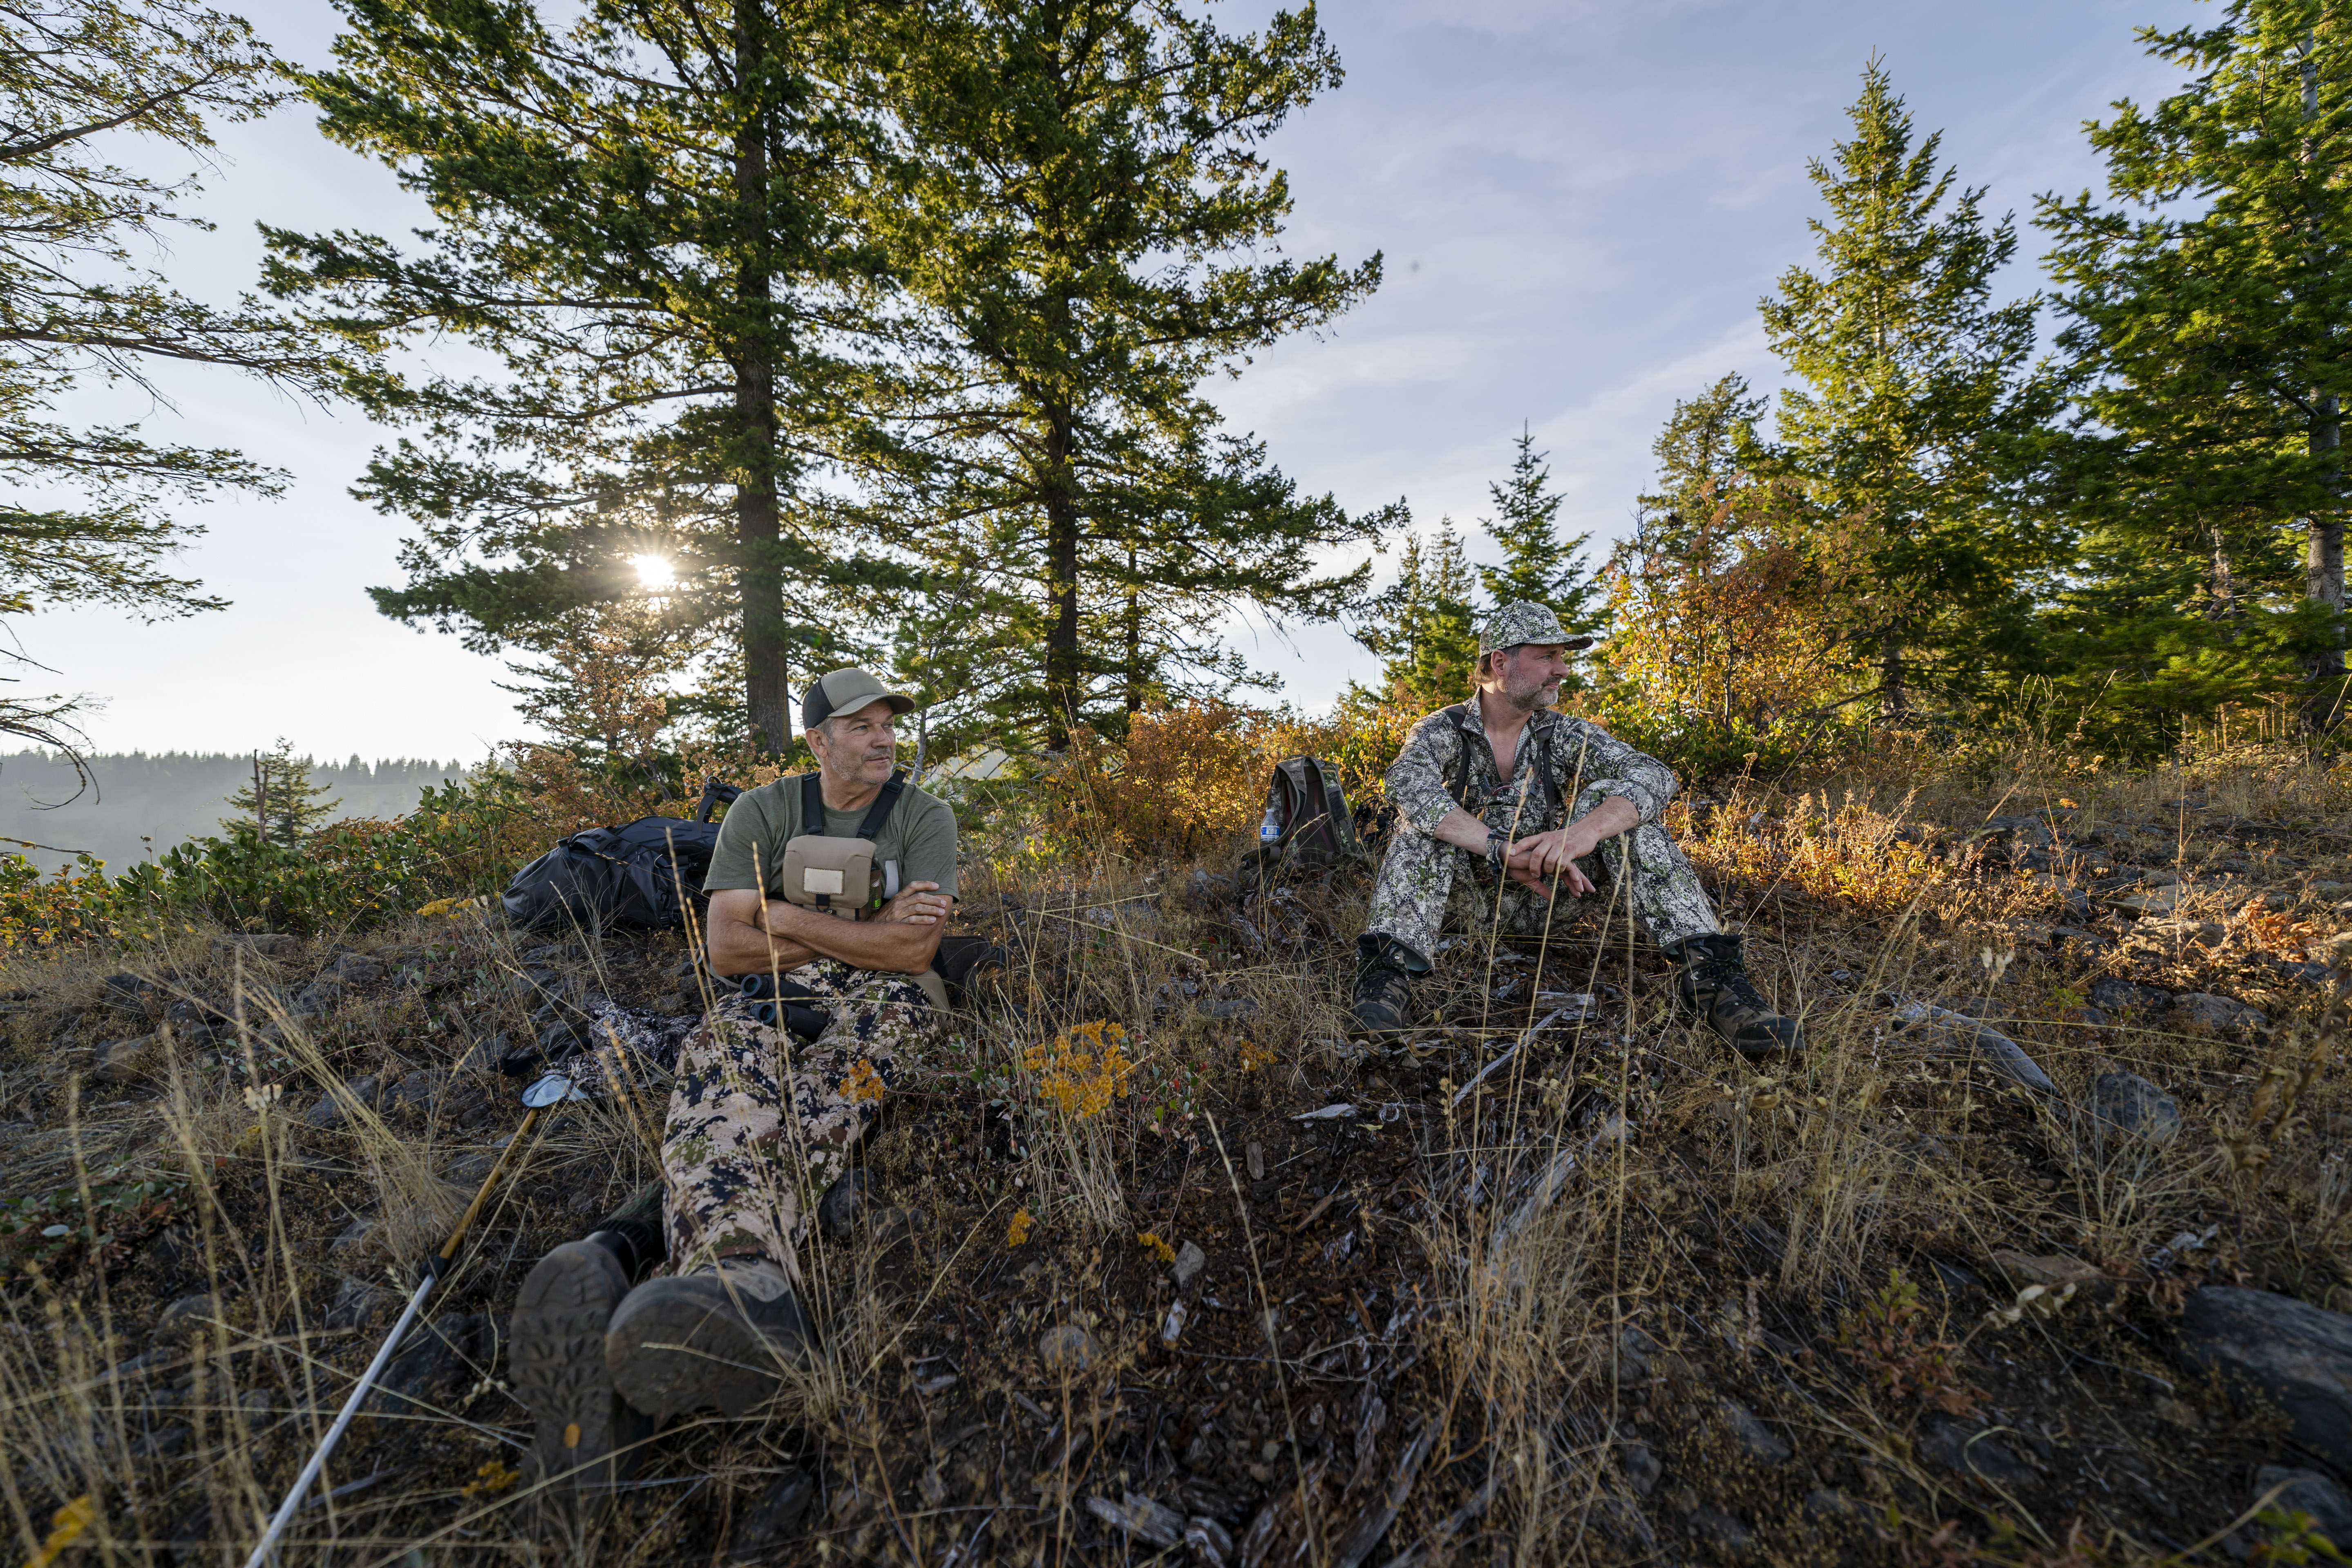 Two middle aged men wearing camouflage clothing sit on a mountainside in Washington state while hunting elk with a crossbow. It is a warm and sunny Autumn afternoon.